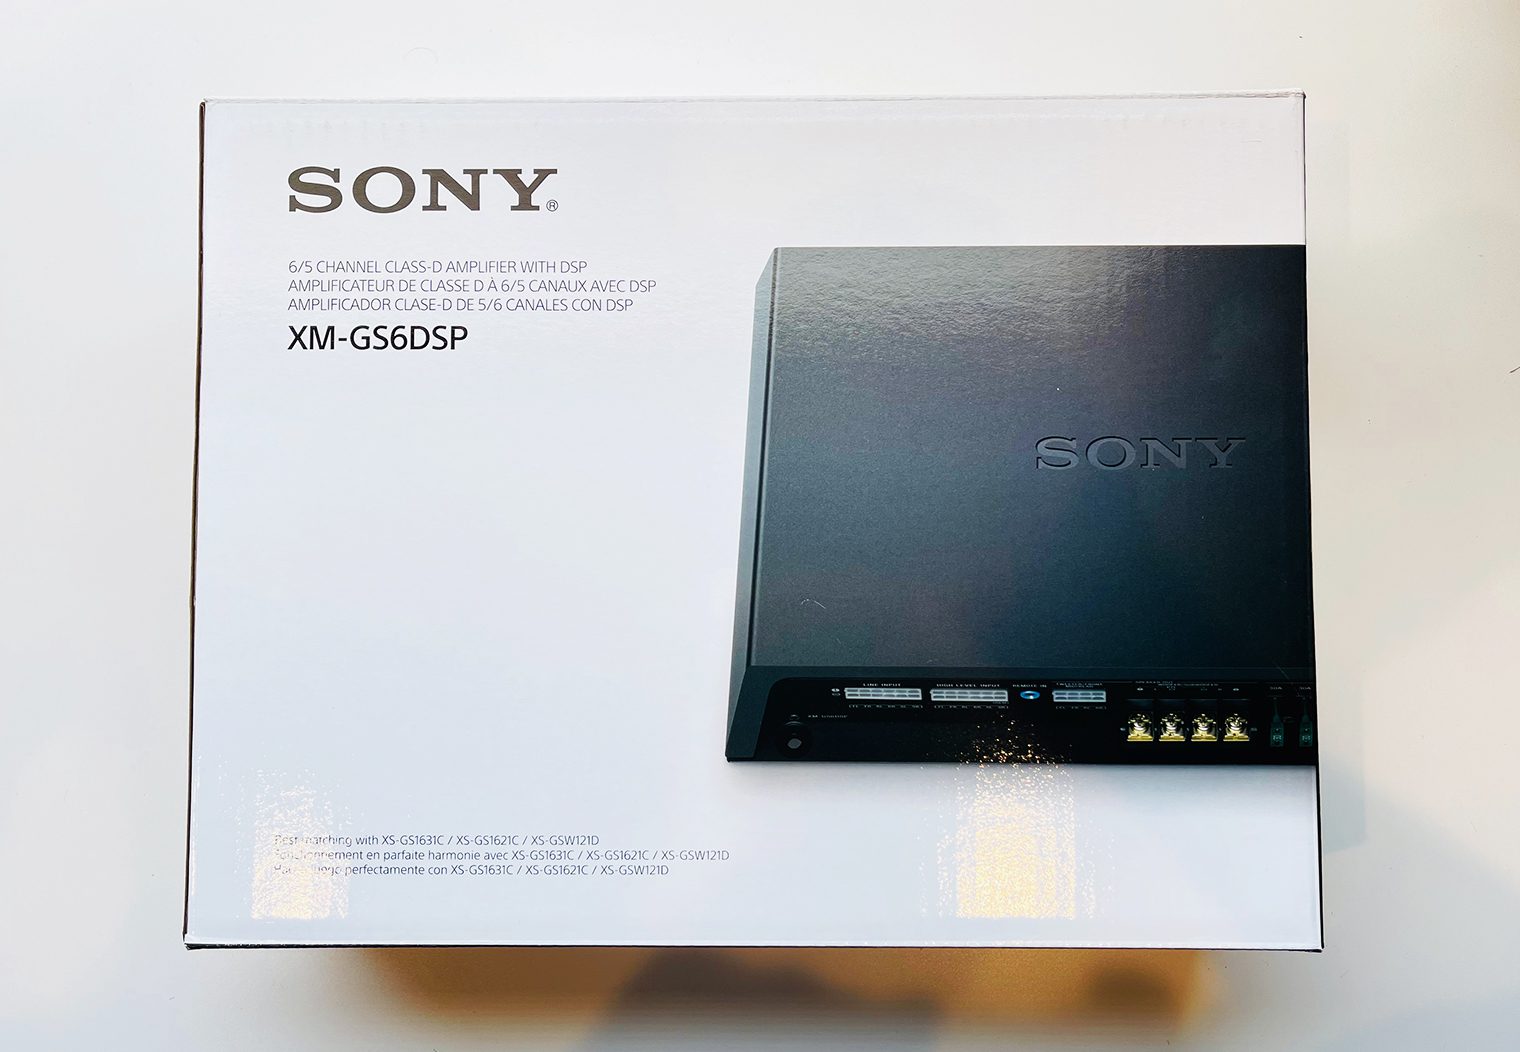 Sony XM-GS6DSP in box, front view of box for review